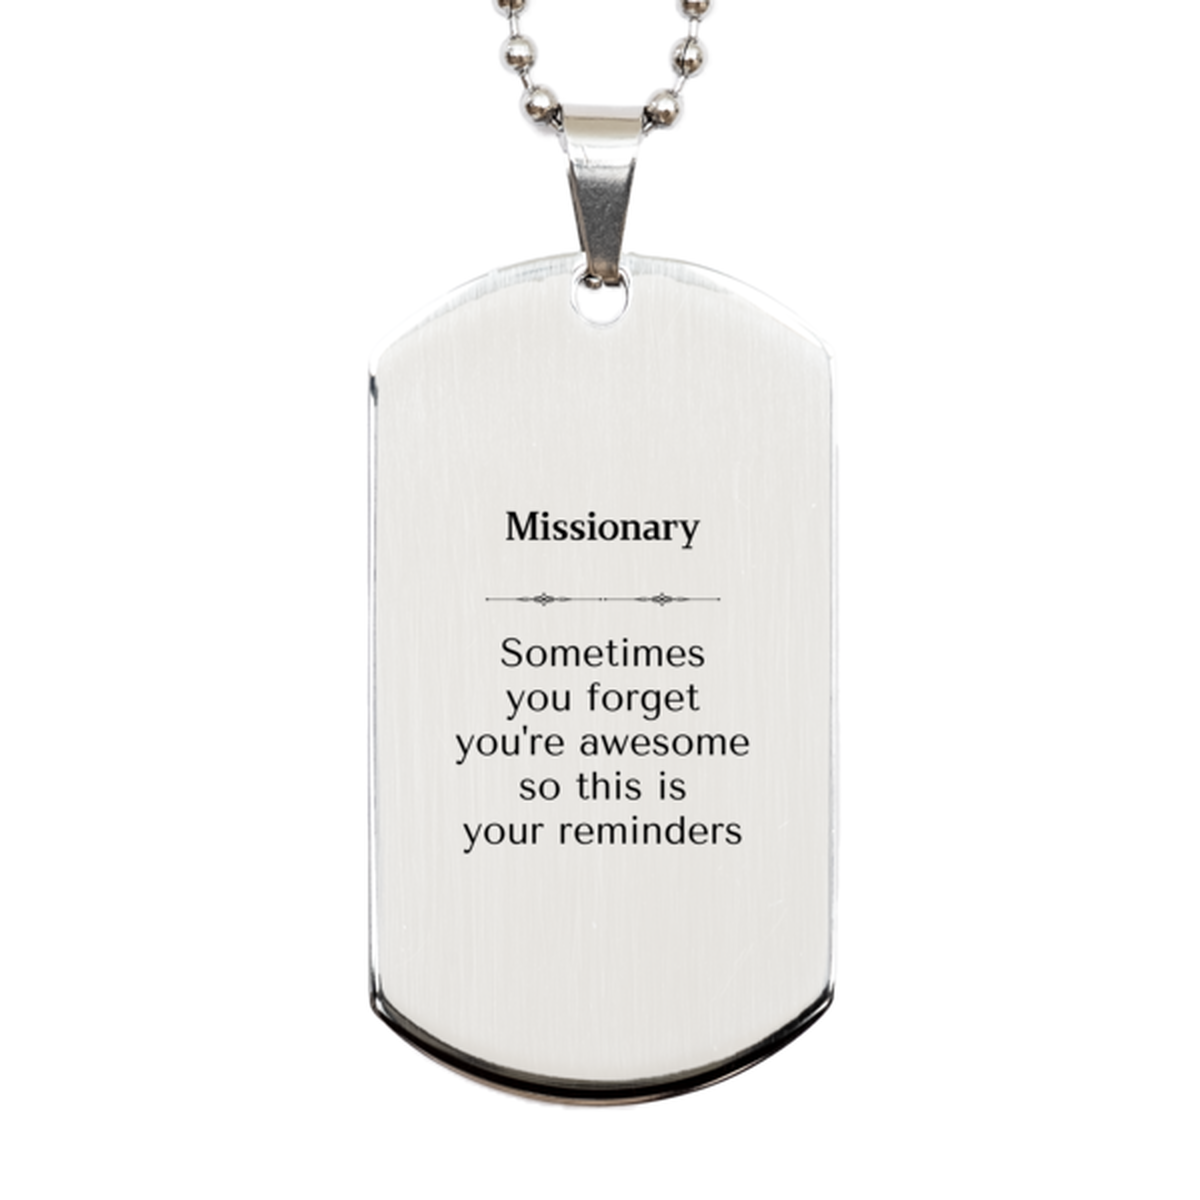 Sentimental Missionary Silver Dog Tag, Missionary Sometimes you forget you're awesome so this is your reminders, Graduation Christmas Birthday Gifts for Missionary, Men, Women, Coworkers